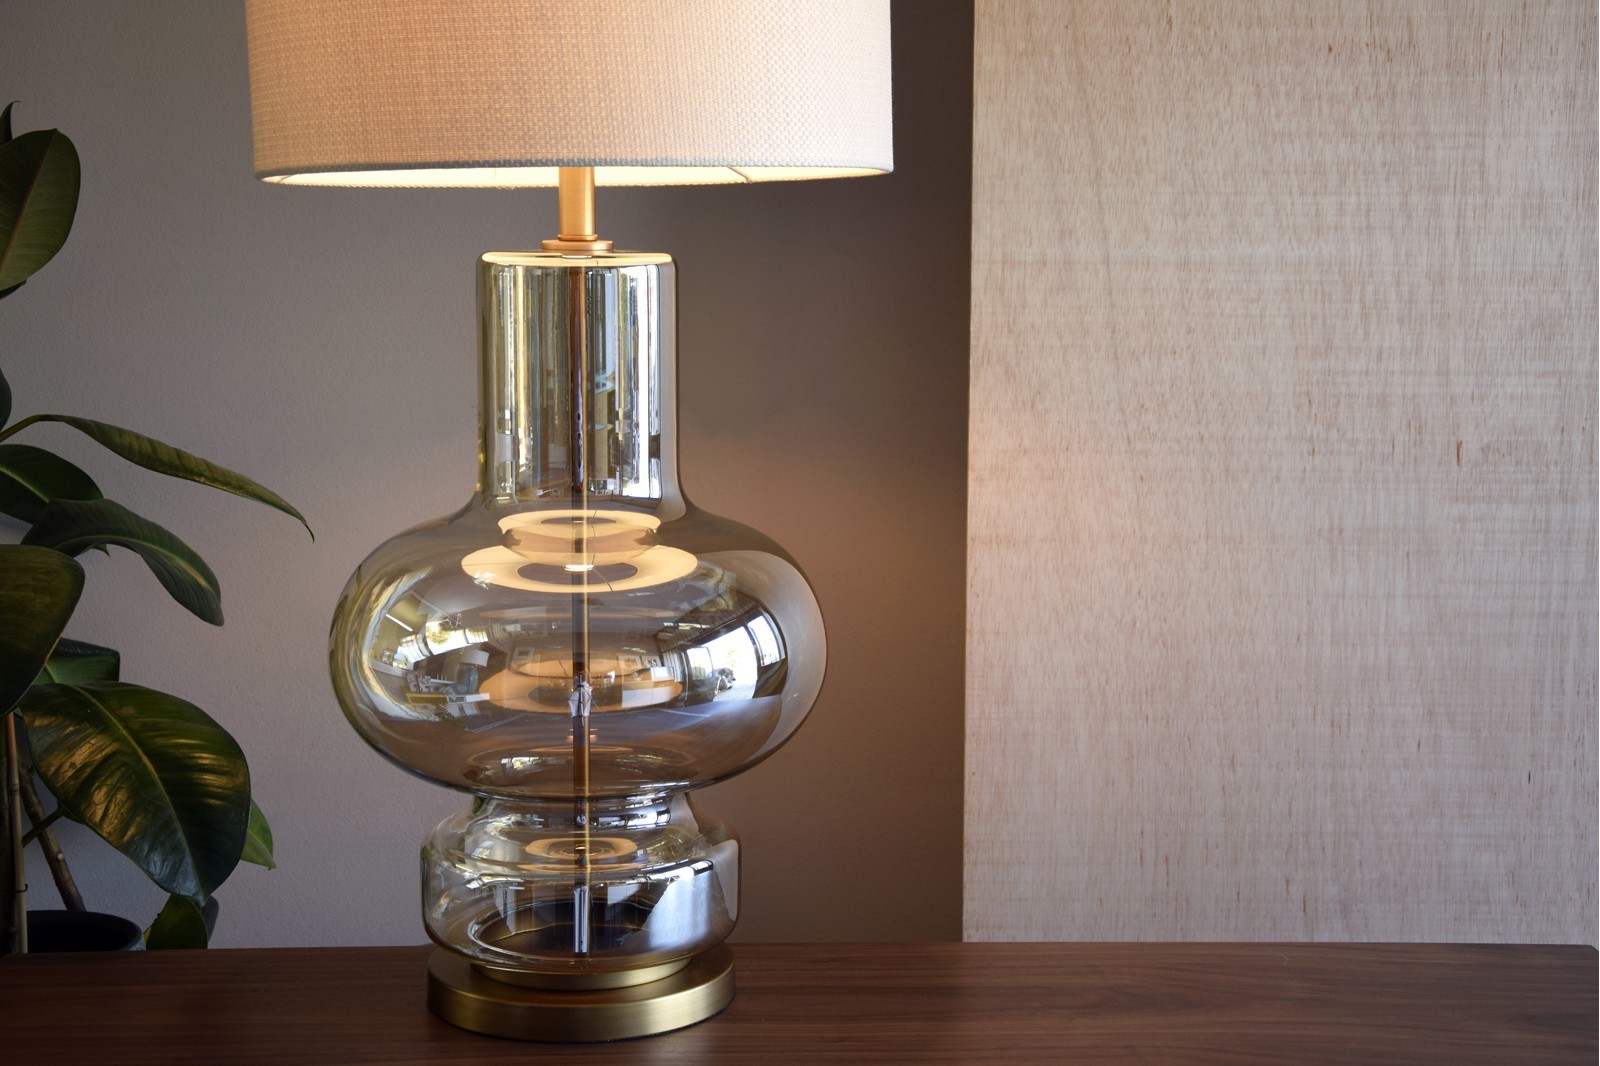 AMBER GLASS TABLE LAMP WITH SHADE